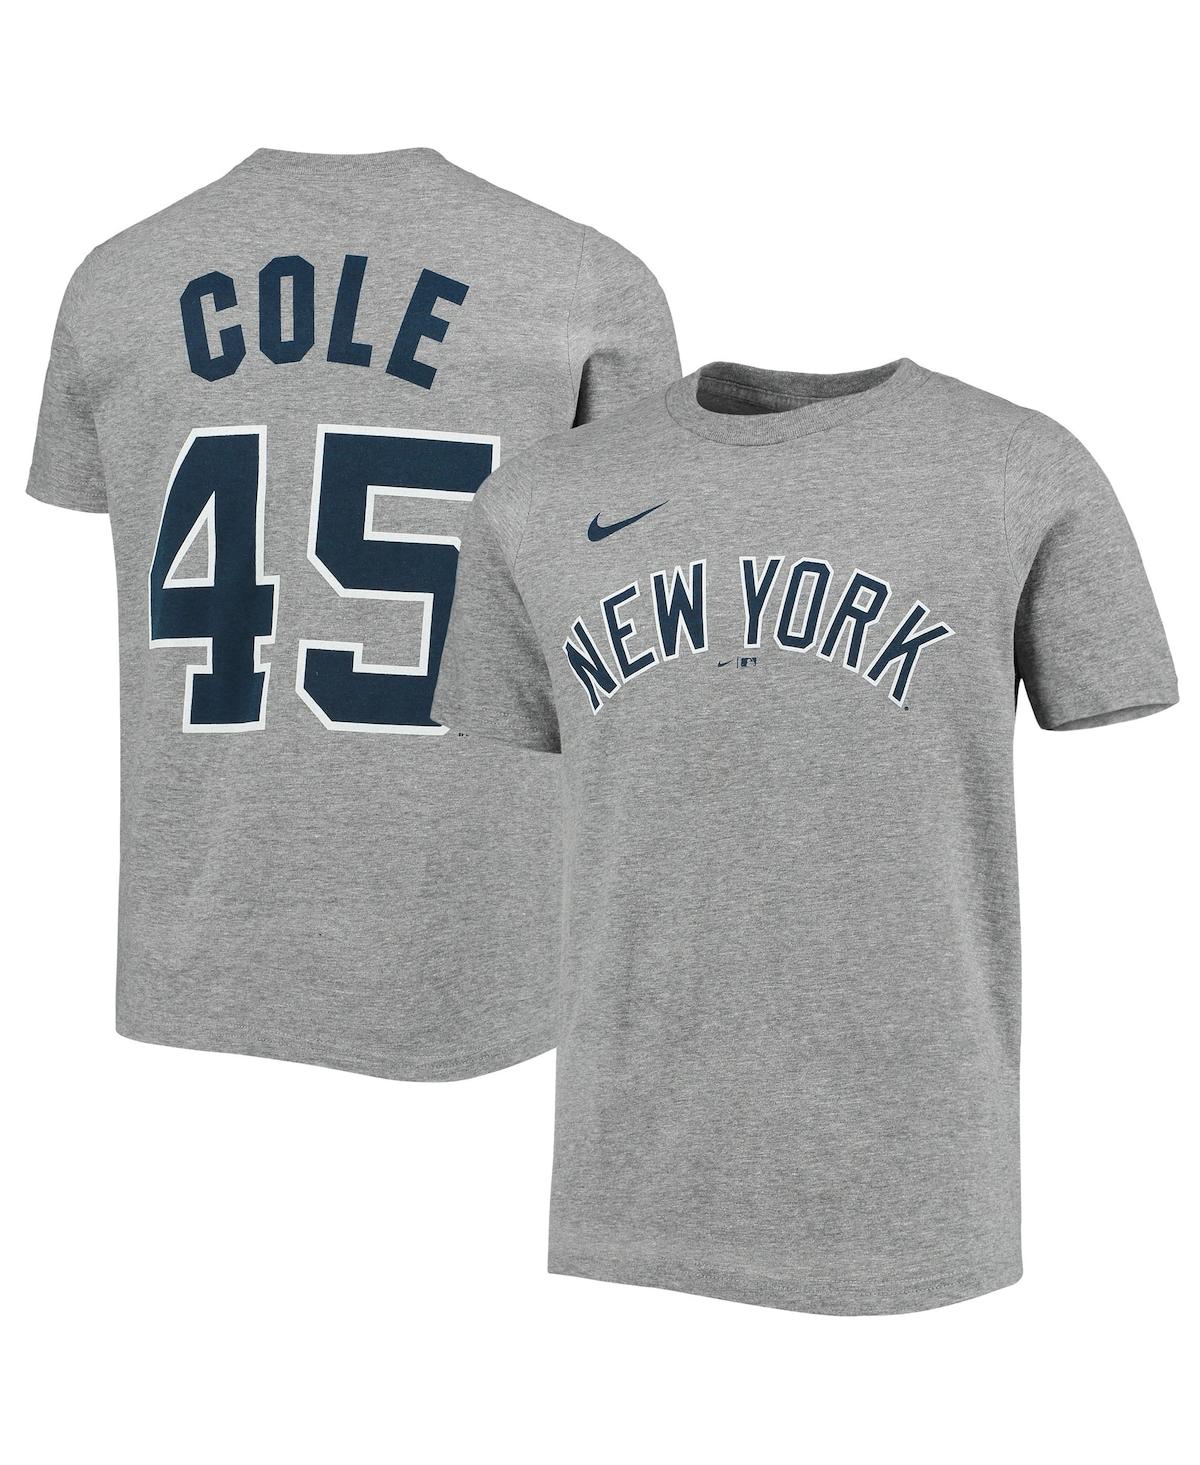 Youth Boys Nike Gerrit Cole Heather Gray New York Yankees Player Name and Number T-shirt